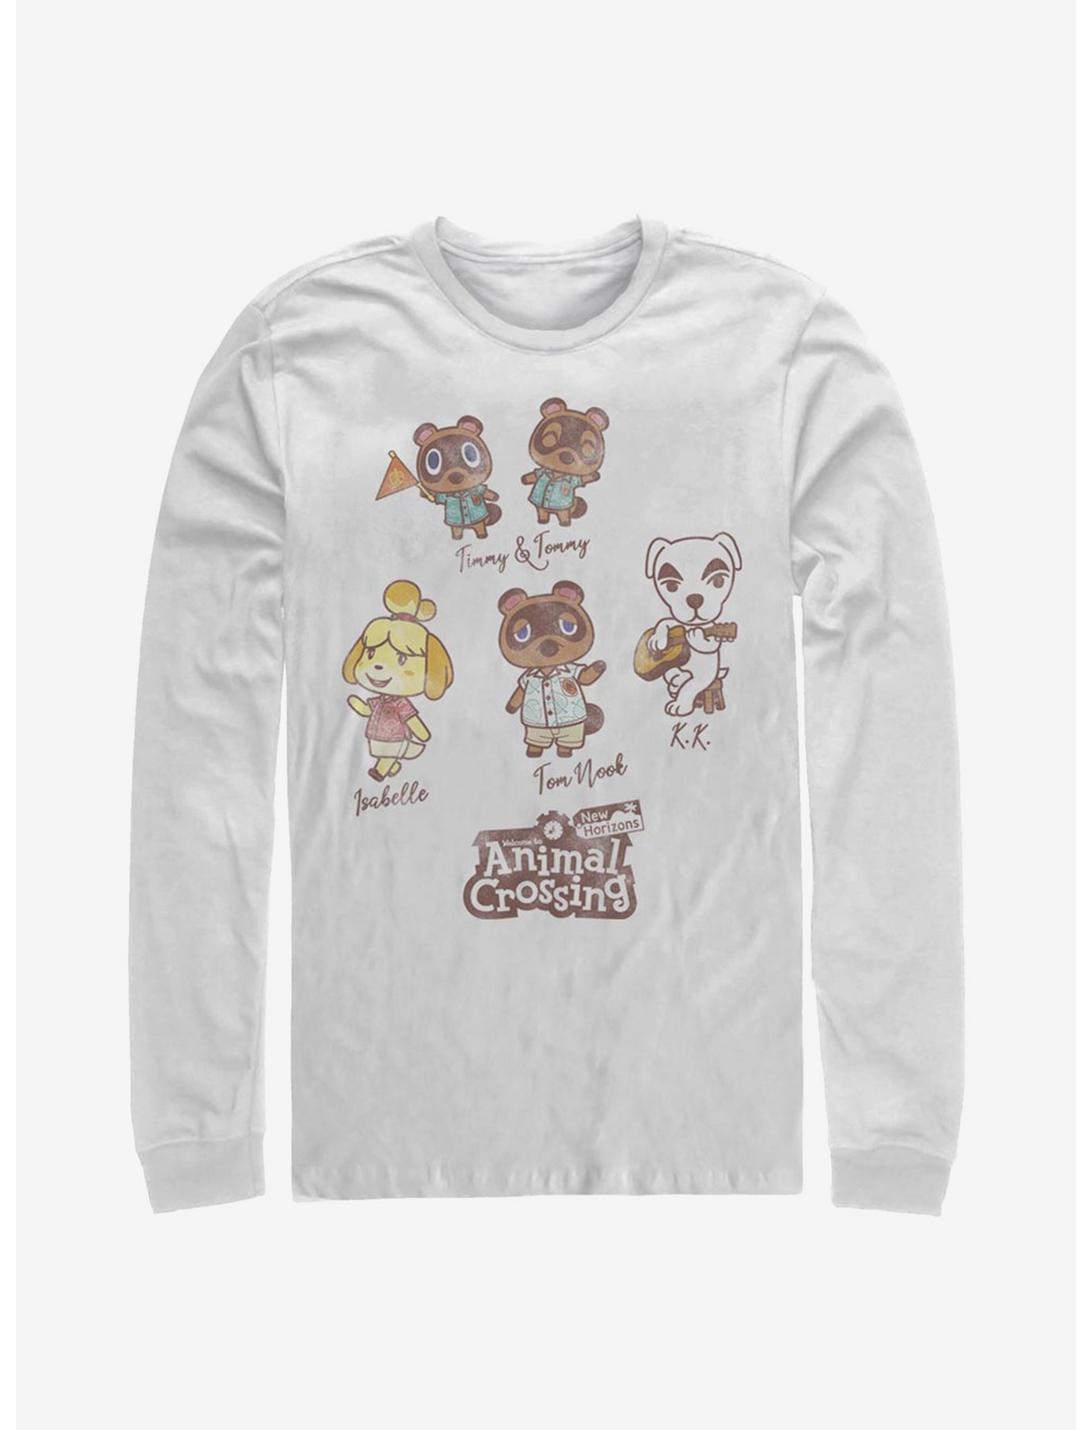 Animal Crossing Character Textbook Long-Sleeve T-Shirt, WHITE, hi-res